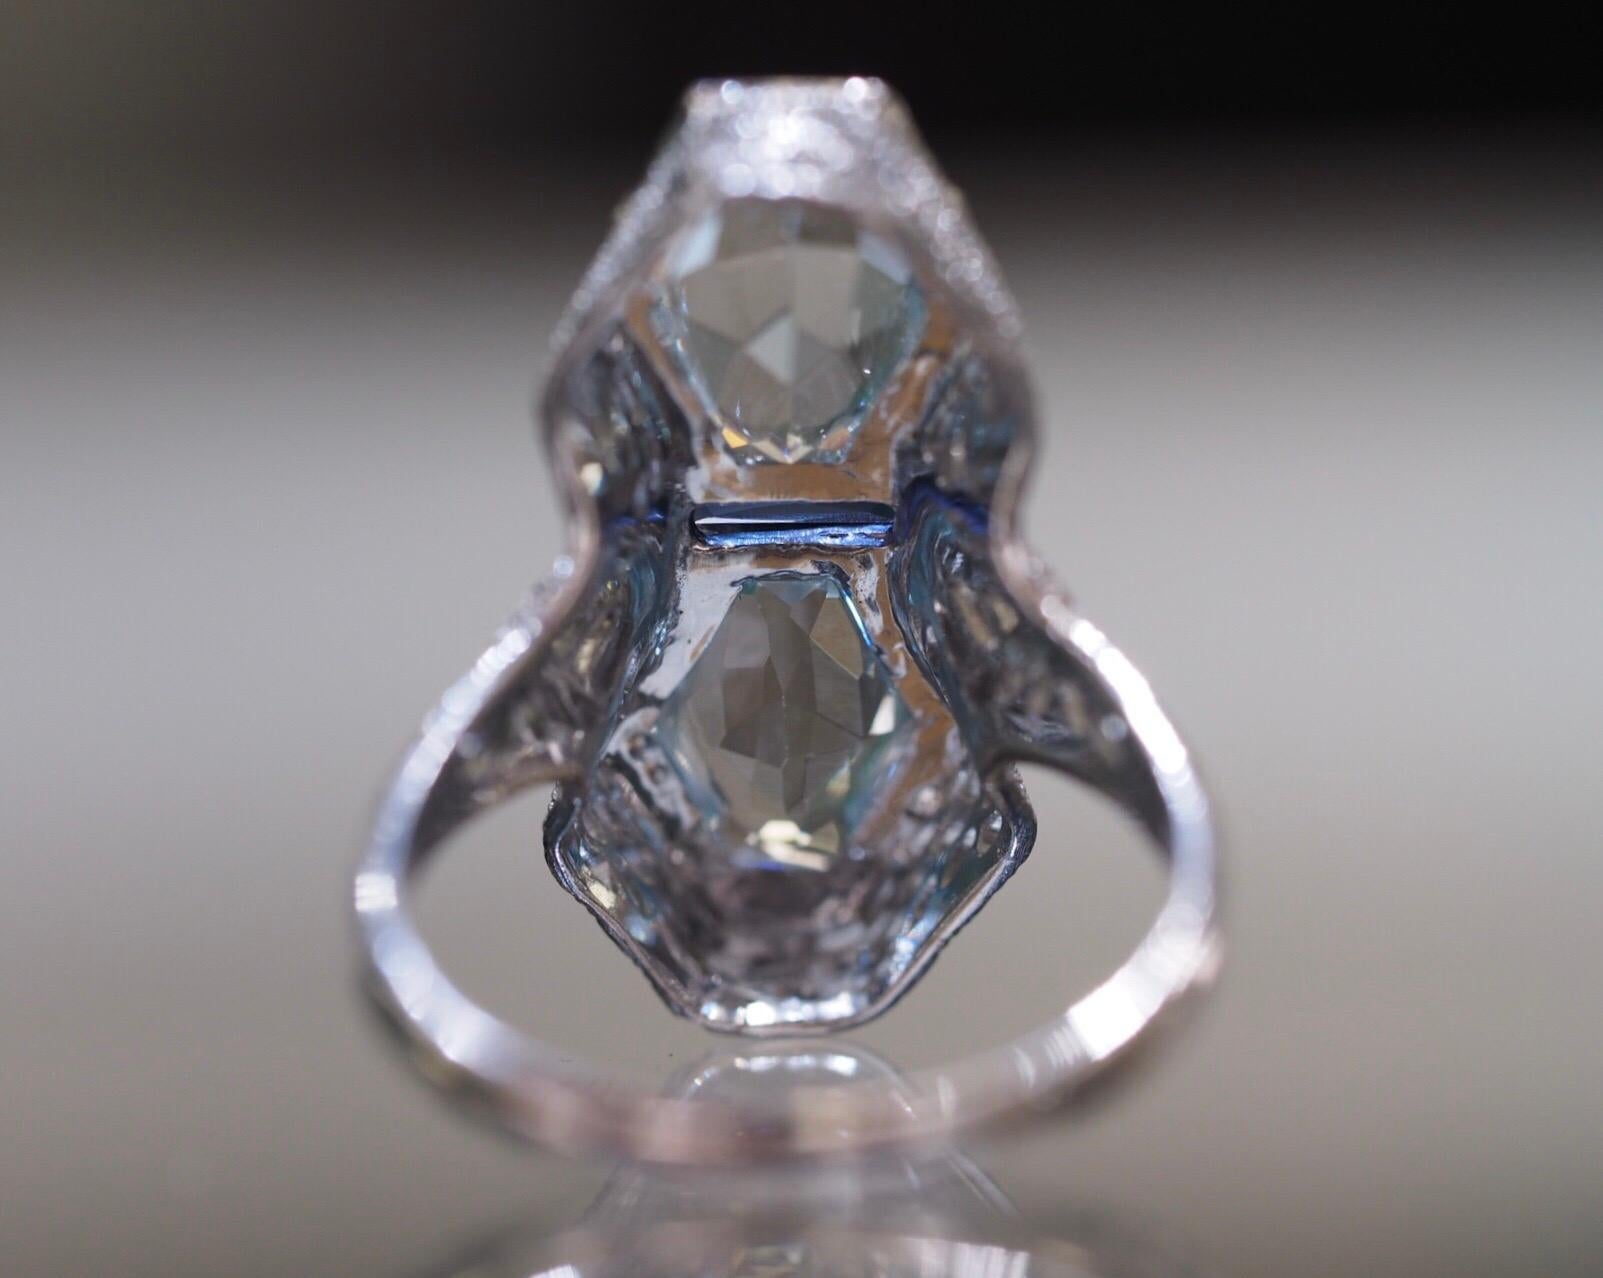 This antique aquamarine ring is hand crafted to perfection. It has two hexagonal natural aquamarines with a lab grown rectangular sapphire bezel set right in the center. The entire mounting is lavishly adorned with fine open filigree scroll-work and